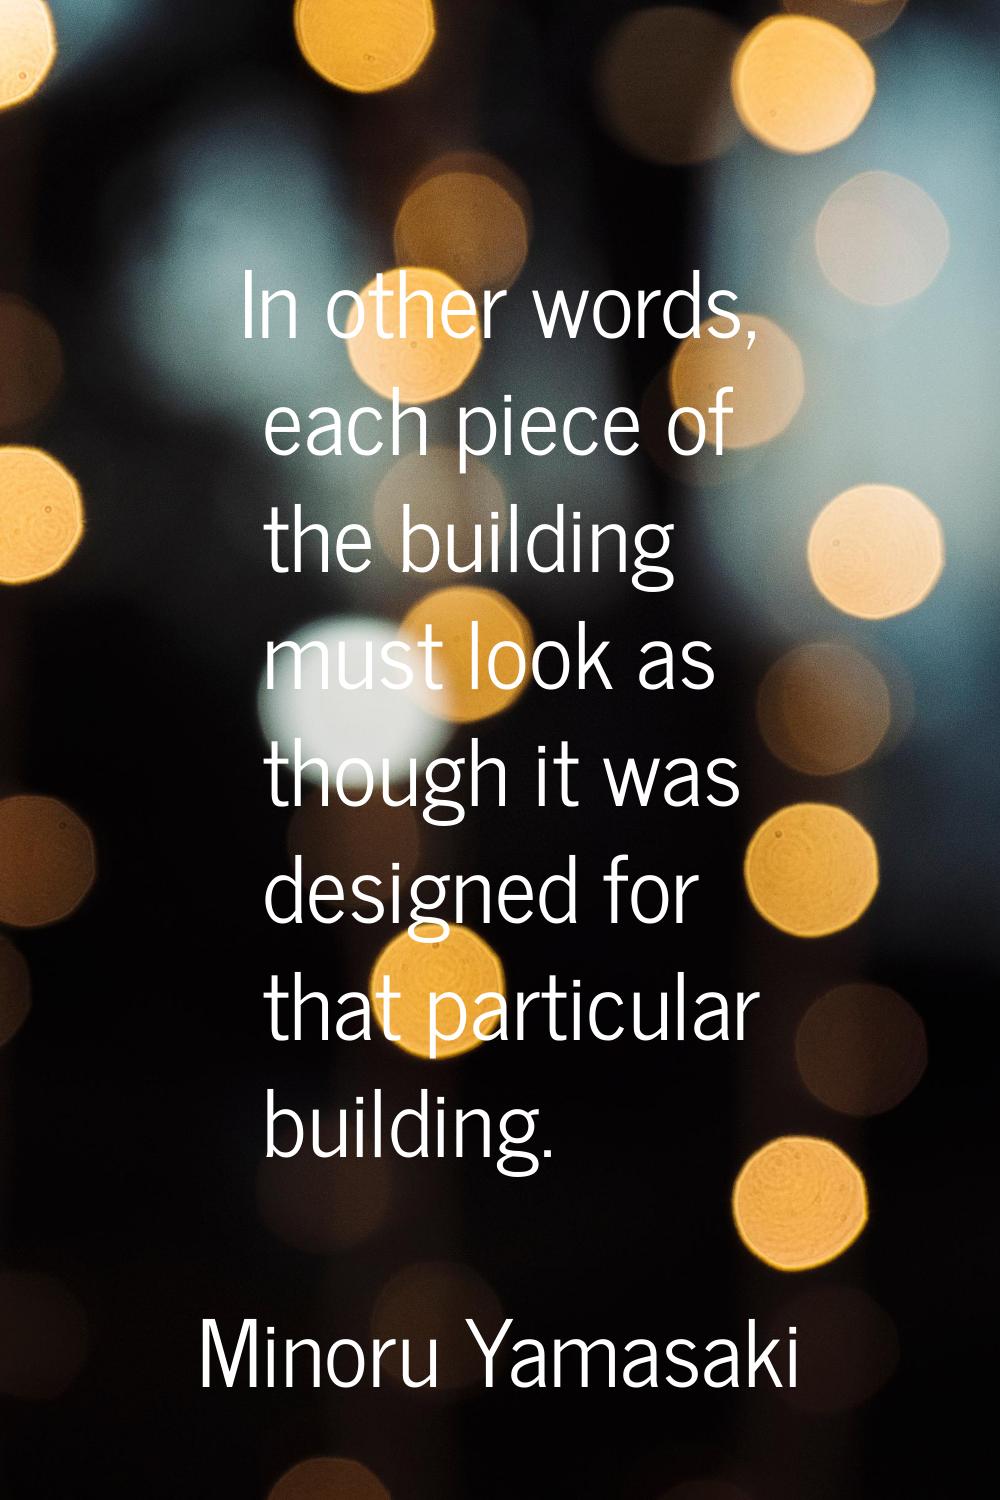 In other words, each piece of the building must look as though it was designed for that particular 